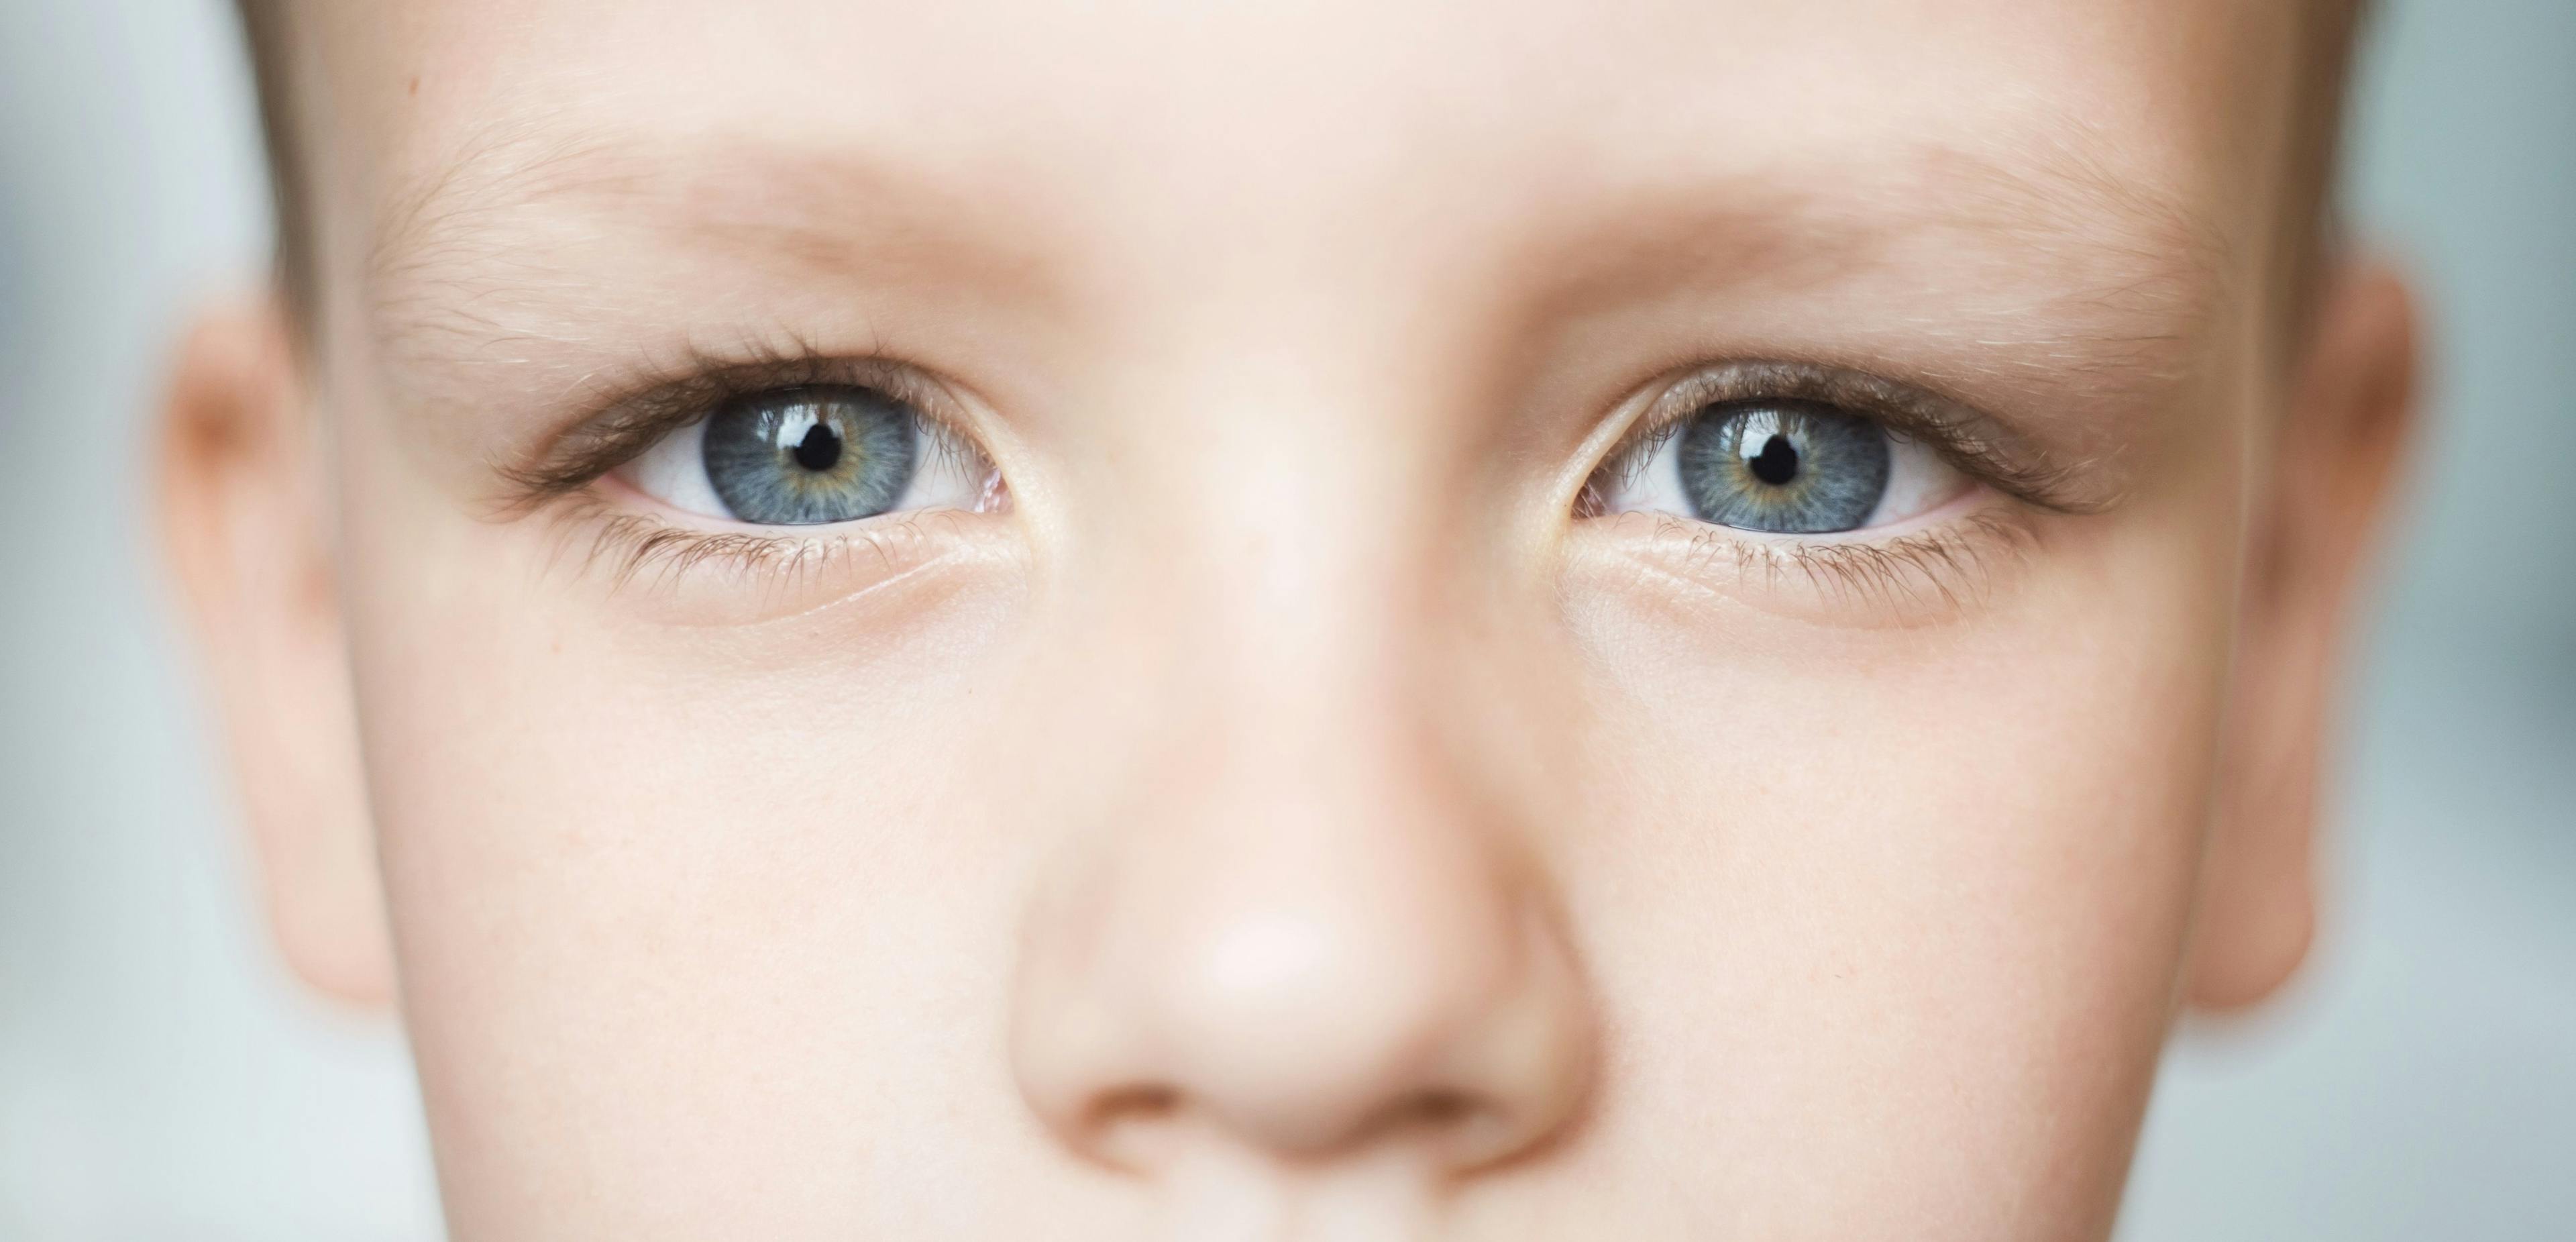 The finding of the low level of hyperopia seen at a median of 5.1 years of age suggested that patients will become myopic as they get older.